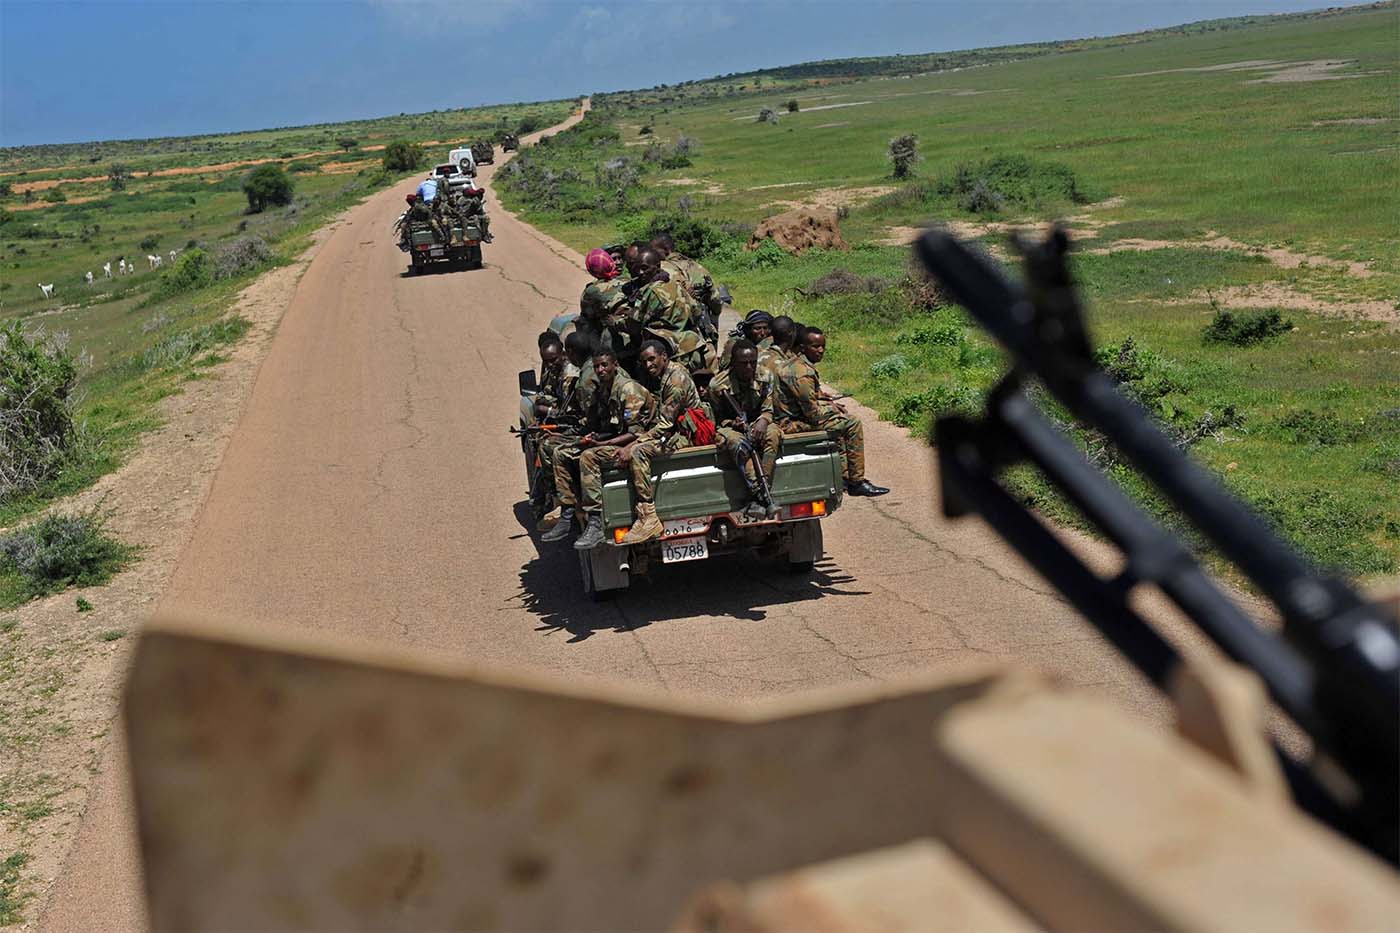 More than 500 American forces are partnering with AMISOM and Somali national security forces in counterterrorism operation